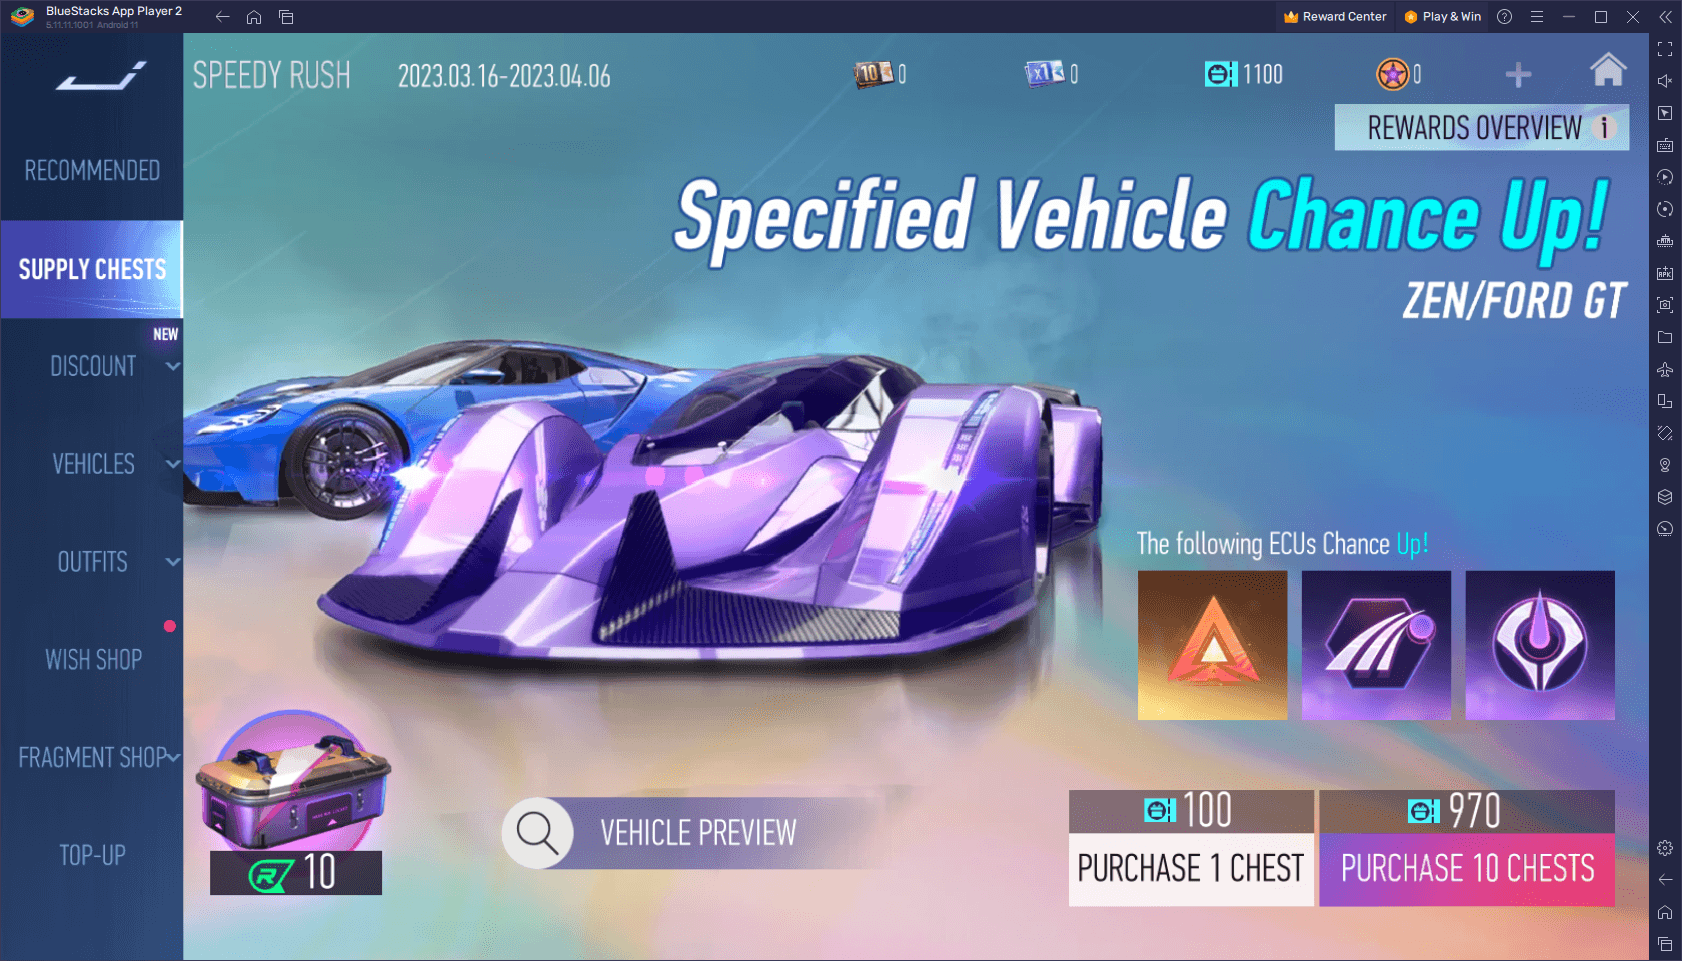 Ace Racer Reroll Guide - How to Obtain the Best Cars from the Very Beginning